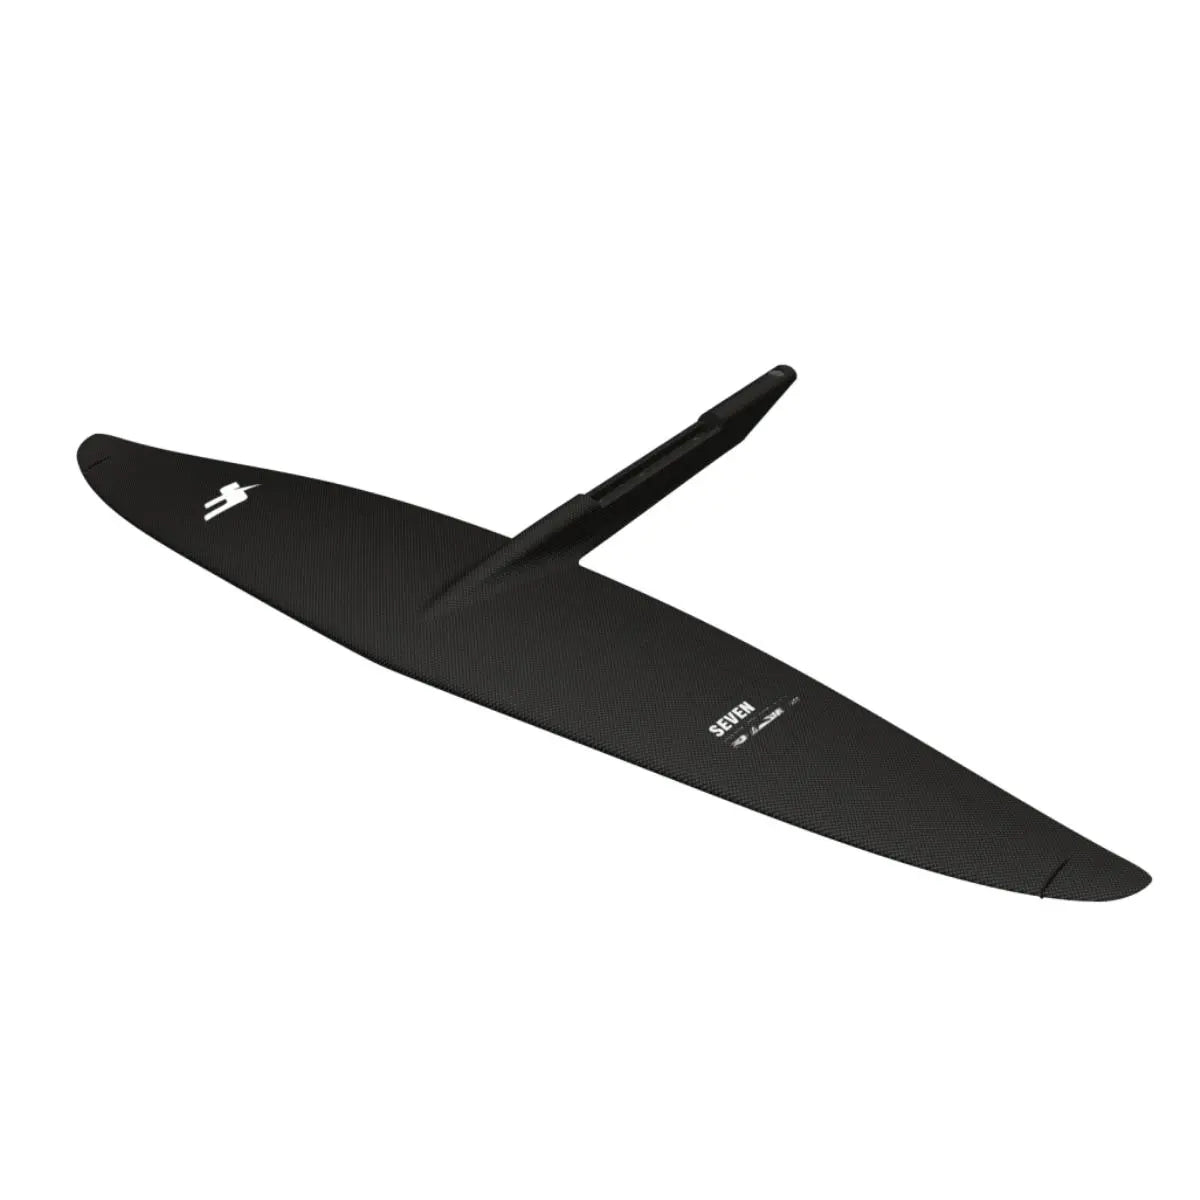 Seven Seas Carbon Front Wing